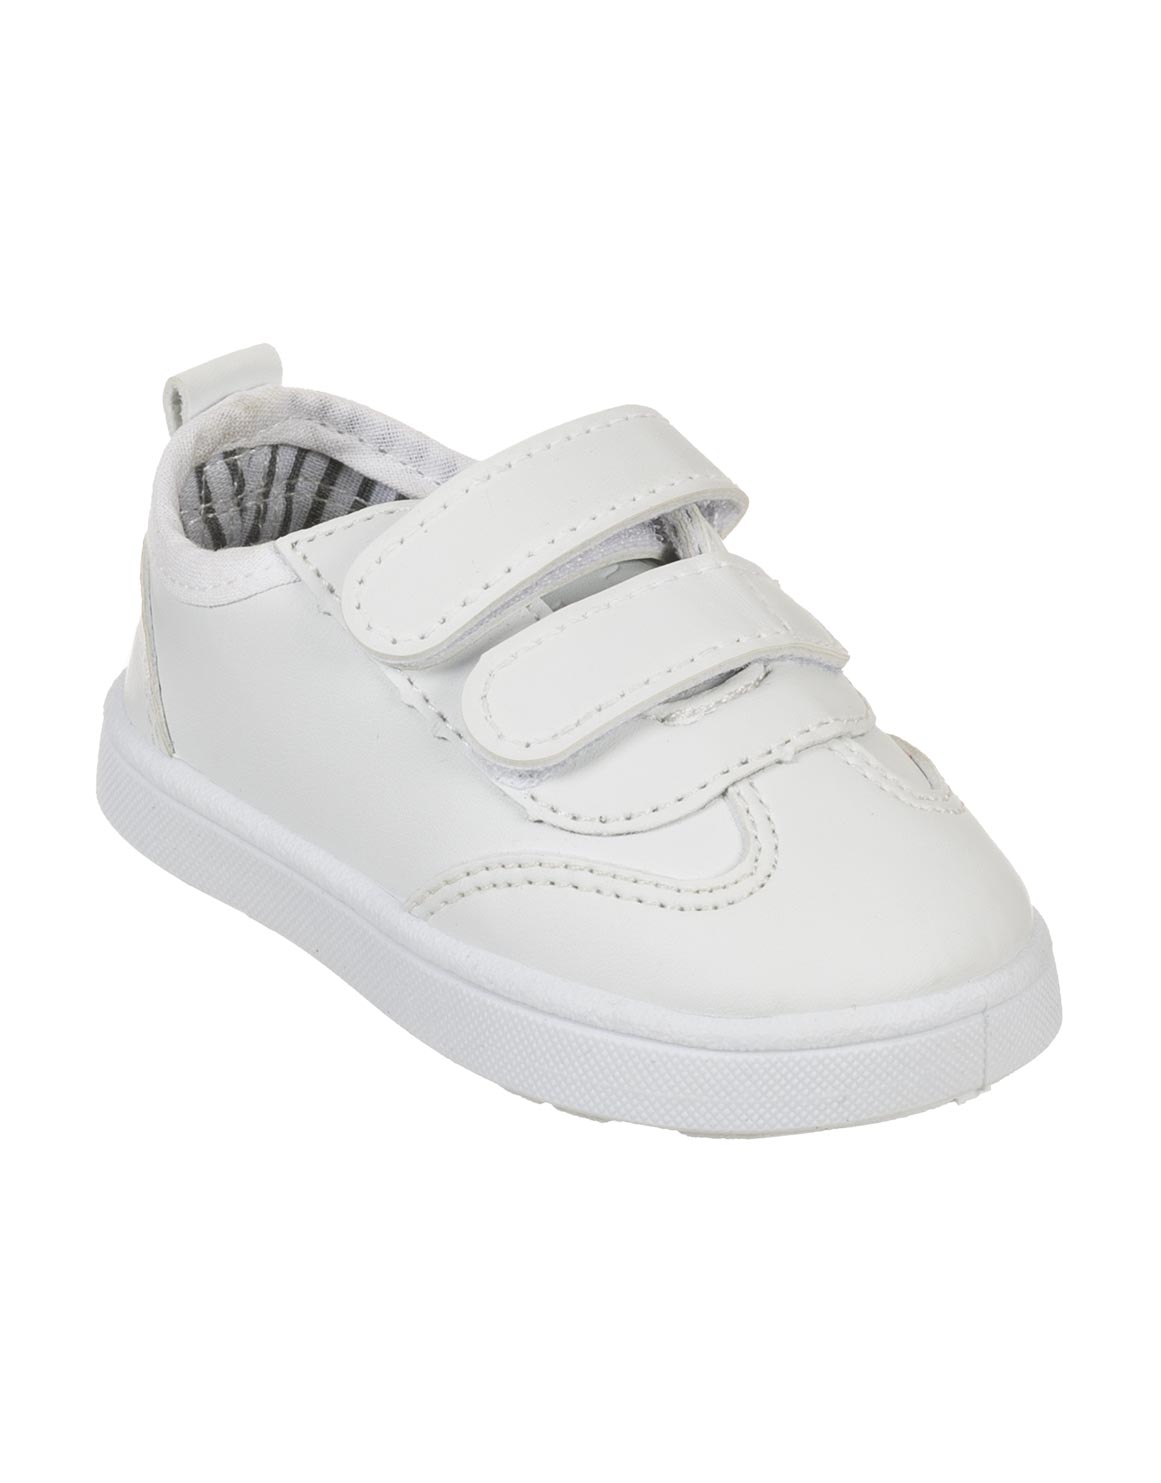 woolworths baby boy shoes